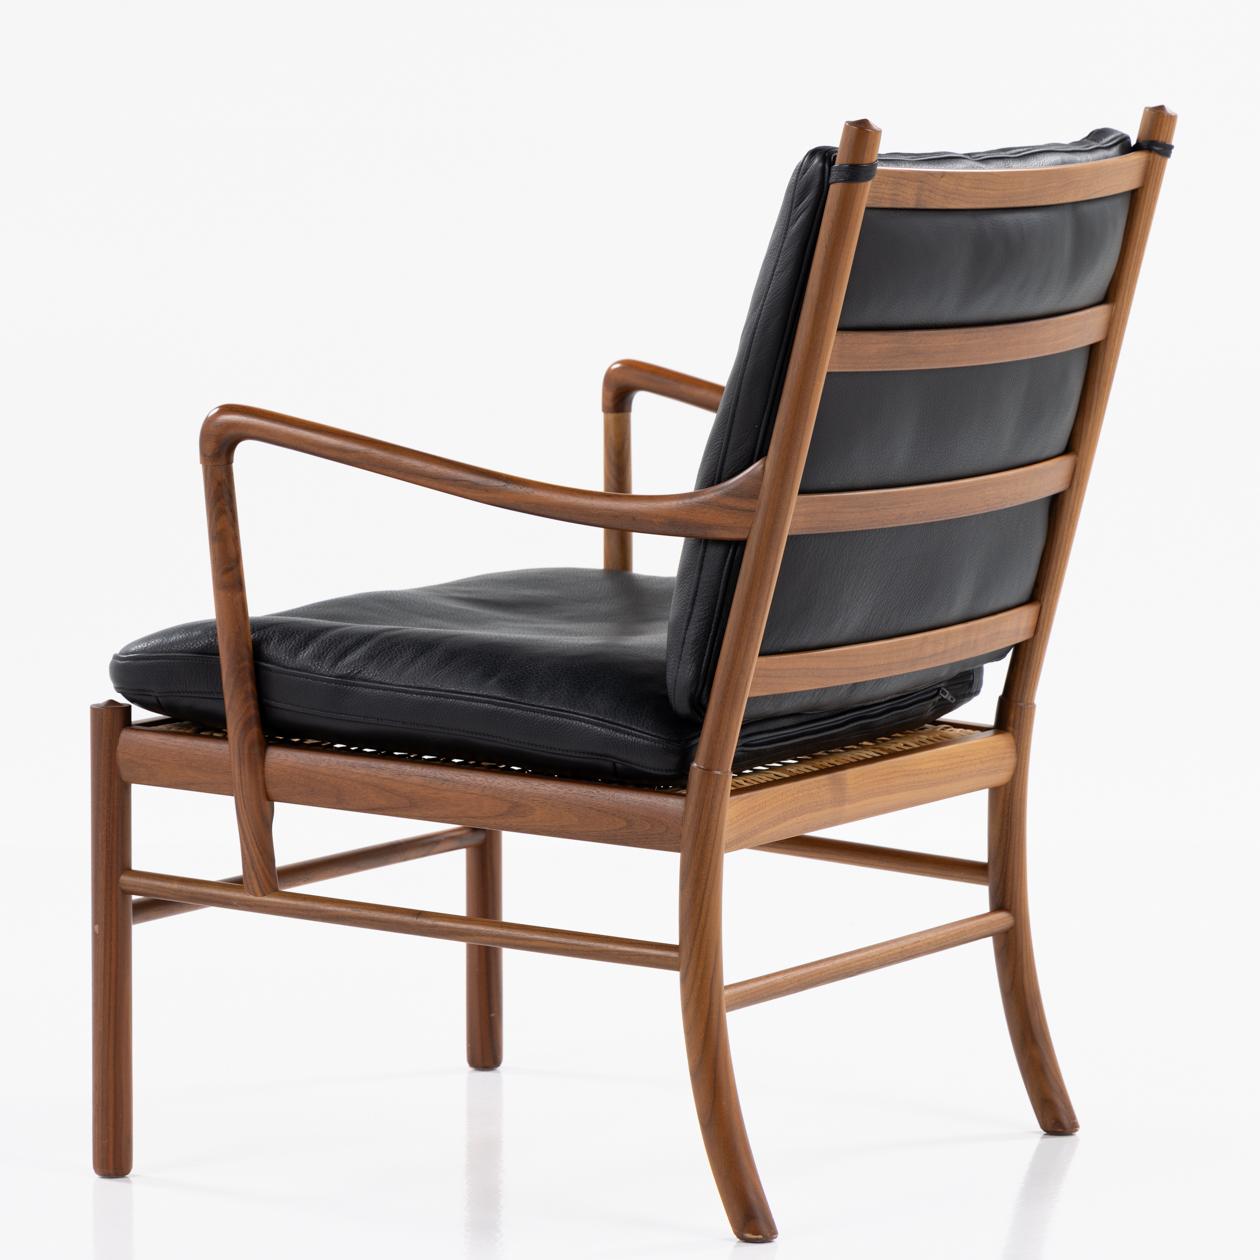 PJ 149 - 'Colonial chair' in black leather and walnut. Ole Wanscher / P. J Furniture